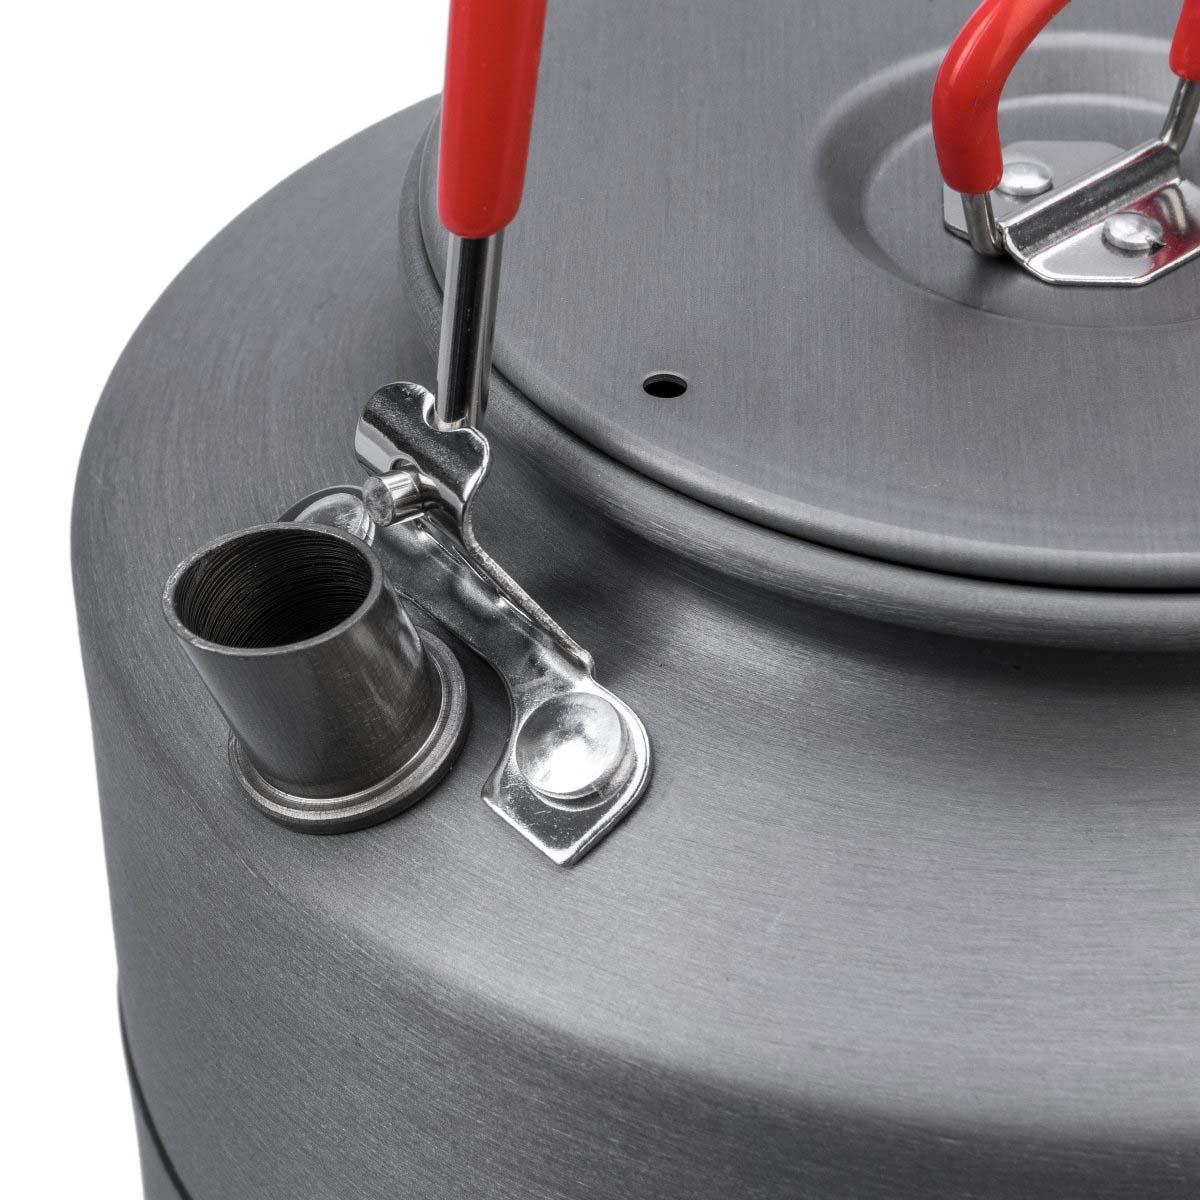 Compact Outdoor Anodized Aluminum Kettle for Camping with Windscreen Bottom